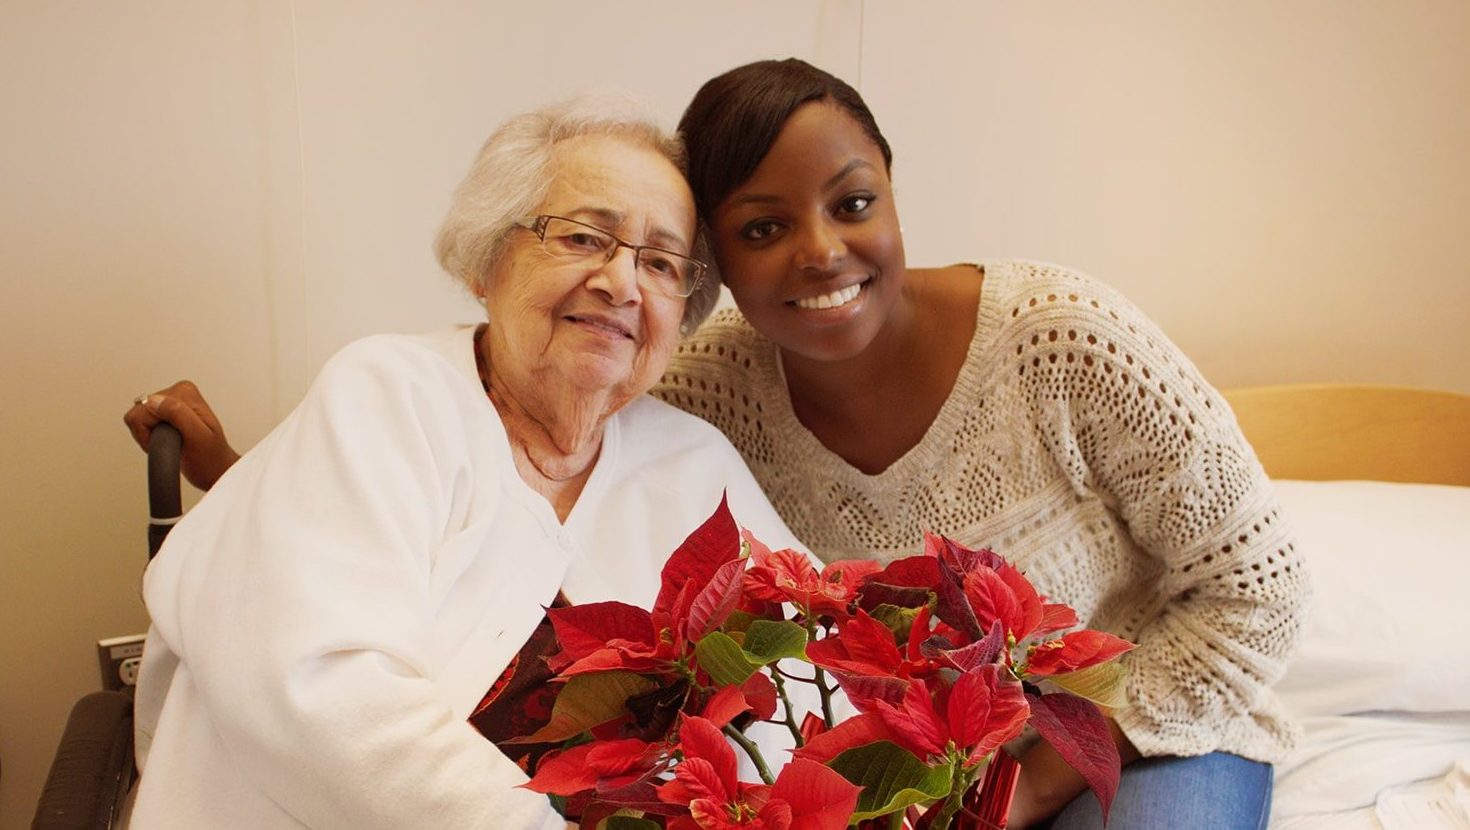 An elder and a volunteer smiling for the camera while holding a poinsettia.